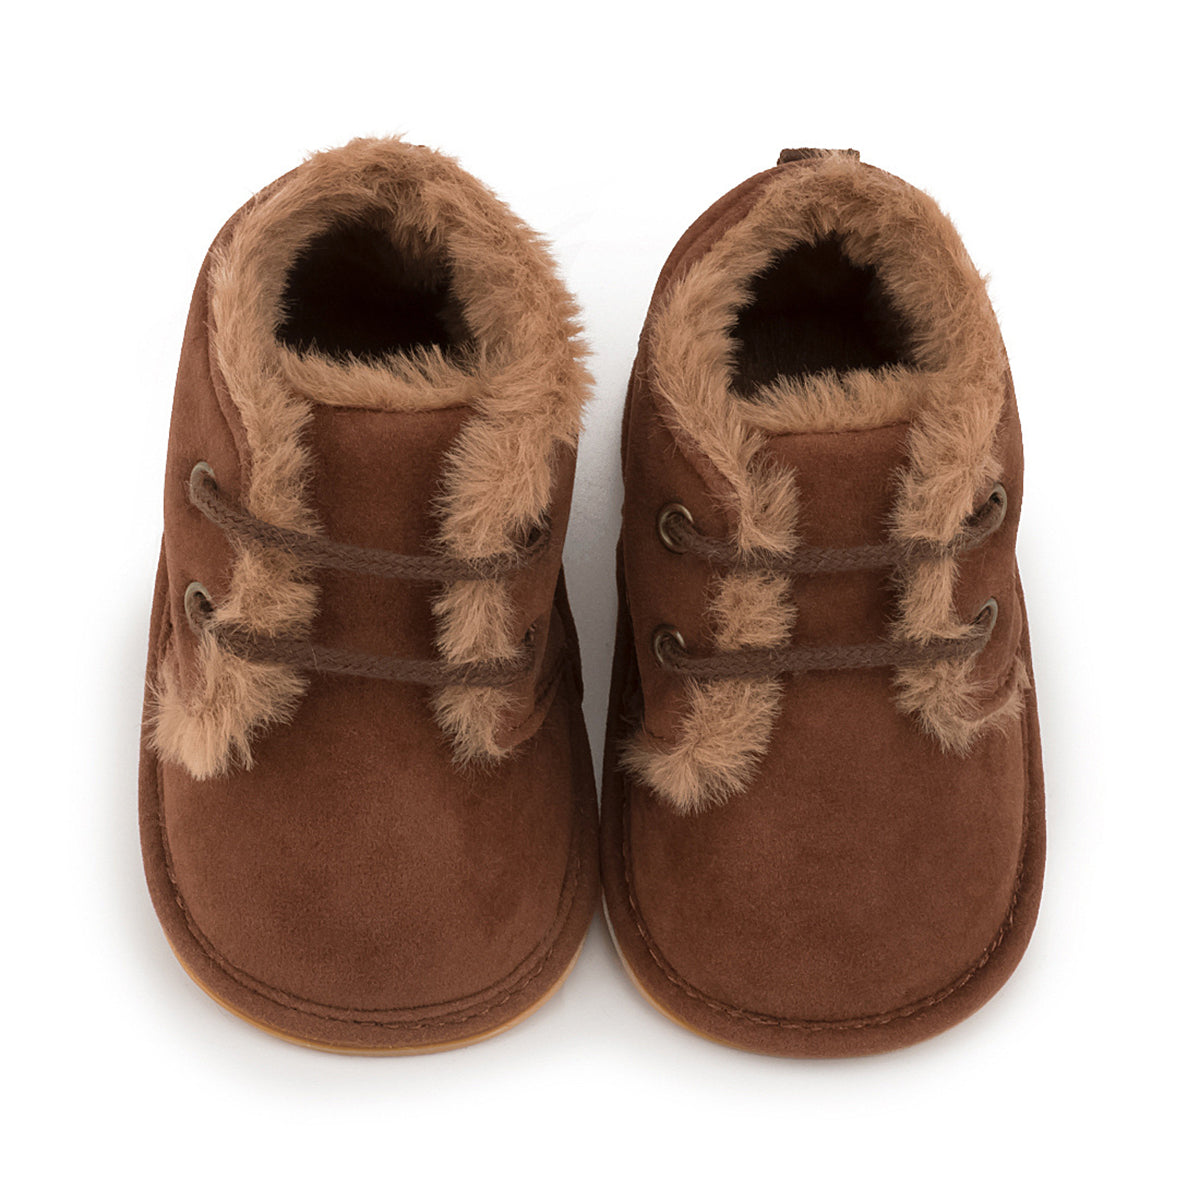 Round Toe Thermal Kid Sneakers Chestnut / 4C Apparel and Accessories